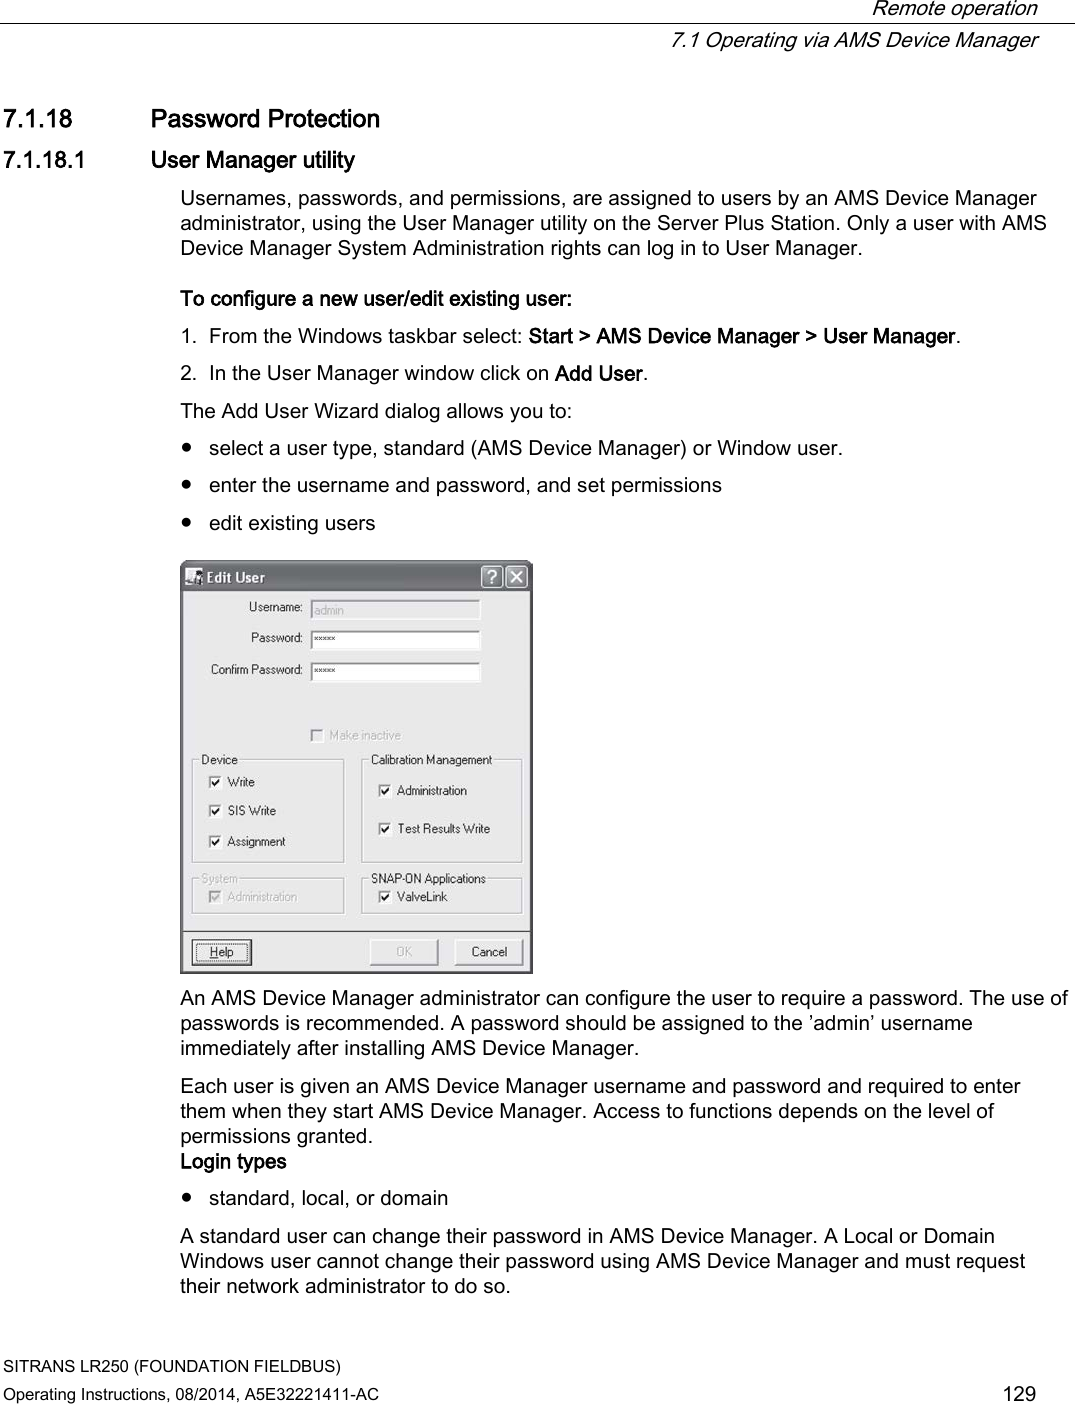  Remote operation  7.1 Operating via AMS Device Manager SITRANS LR250 (FOUNDATION FIELDBUS) Operating Instructions, 08/2014, A5E32221411-AC 129 7.1.18 Password Protection 7.1.18.1 User Manager utility Usernames, passwords, and permissions, are assigned to users by an AMS Device Manager administrator, using the User Manager utility on the Server Plus Station. Only a user with AMS Device Manager System Administration rights can log in to User Manager. To configure a new user/edit existing user:  1. From the Windows taskbar select: Start &gt; AMS Device Manager &gt; User Manager. 2. In the User Manager window click on Add User. The Add User Wizard dialog allows you to: ● select a user type, standard (AMS Device Manager) or Window user. ● enter the username and password, and set permissions ● edit existing users  An AMS Device Manager administrator can configure the user to require a password. The use of passwords is recommended. A password should be assigned to the ’admin’ username immediately after installing AMS Device Manager. Each user is given an AMS Device Manager username and password and required to enter them when they start AMS Device Manager. Access to functions depends on the level of permissions granted. Login types ● standard, local, or domain A standard user can change their password in AMS Device Manager. A Local or Domain Windows user cannot change their password using AMS Device Manager and must request their network administrator to do so. 